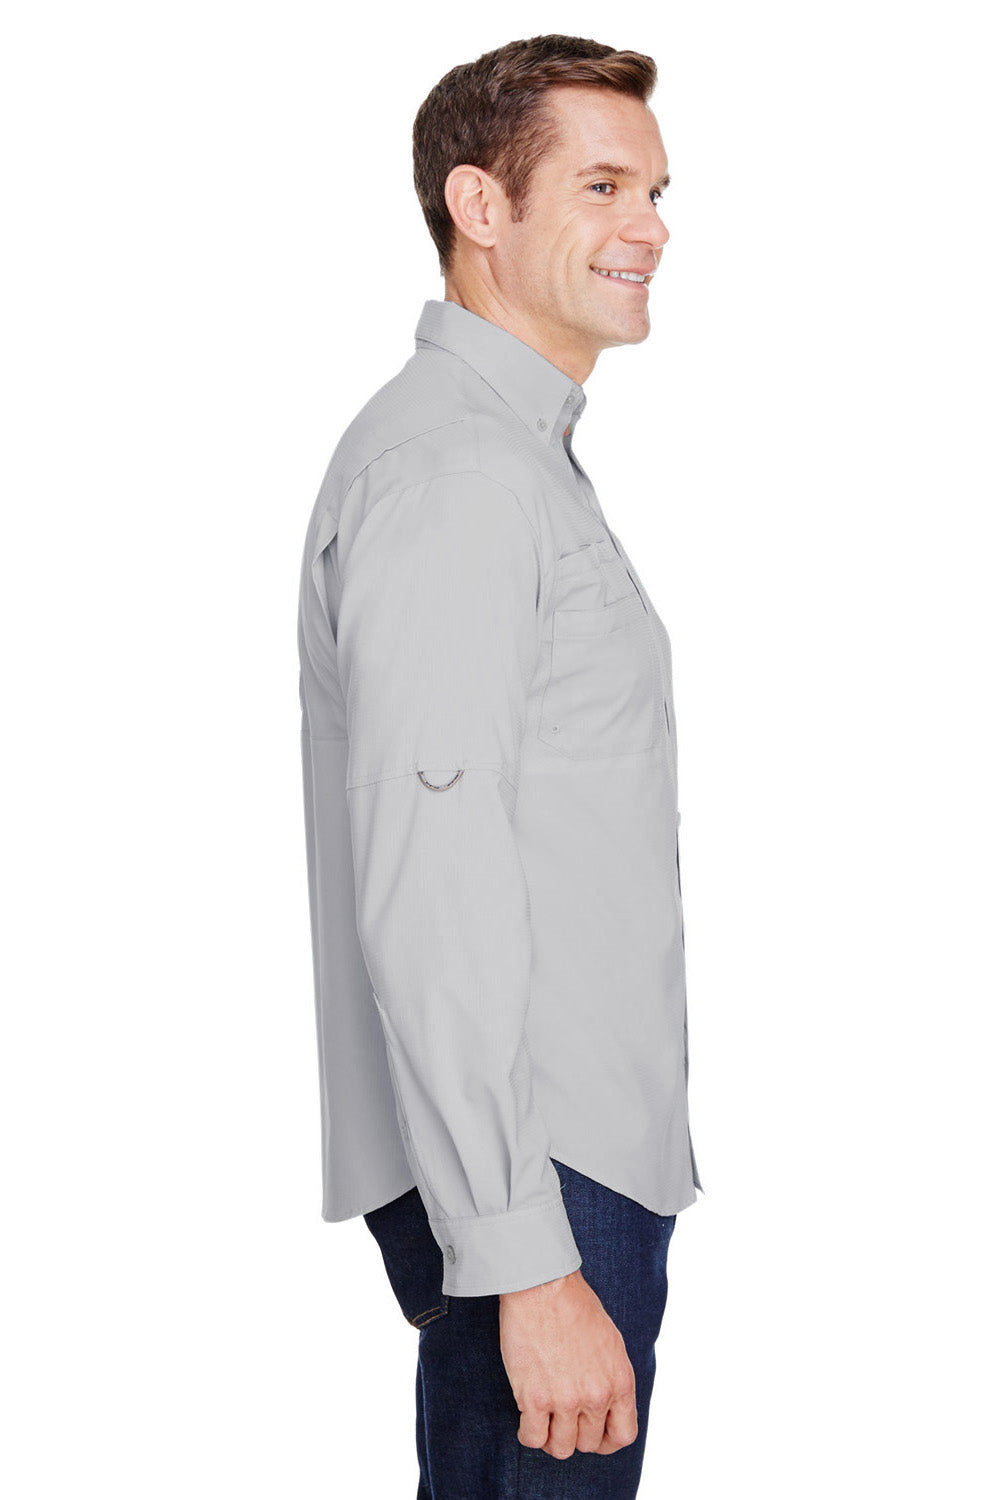 Columbia 7253 Tamiami II Moisture Wicking Long Sleeve Button Down Shirt w/ Double Pockets Cool Grey Side